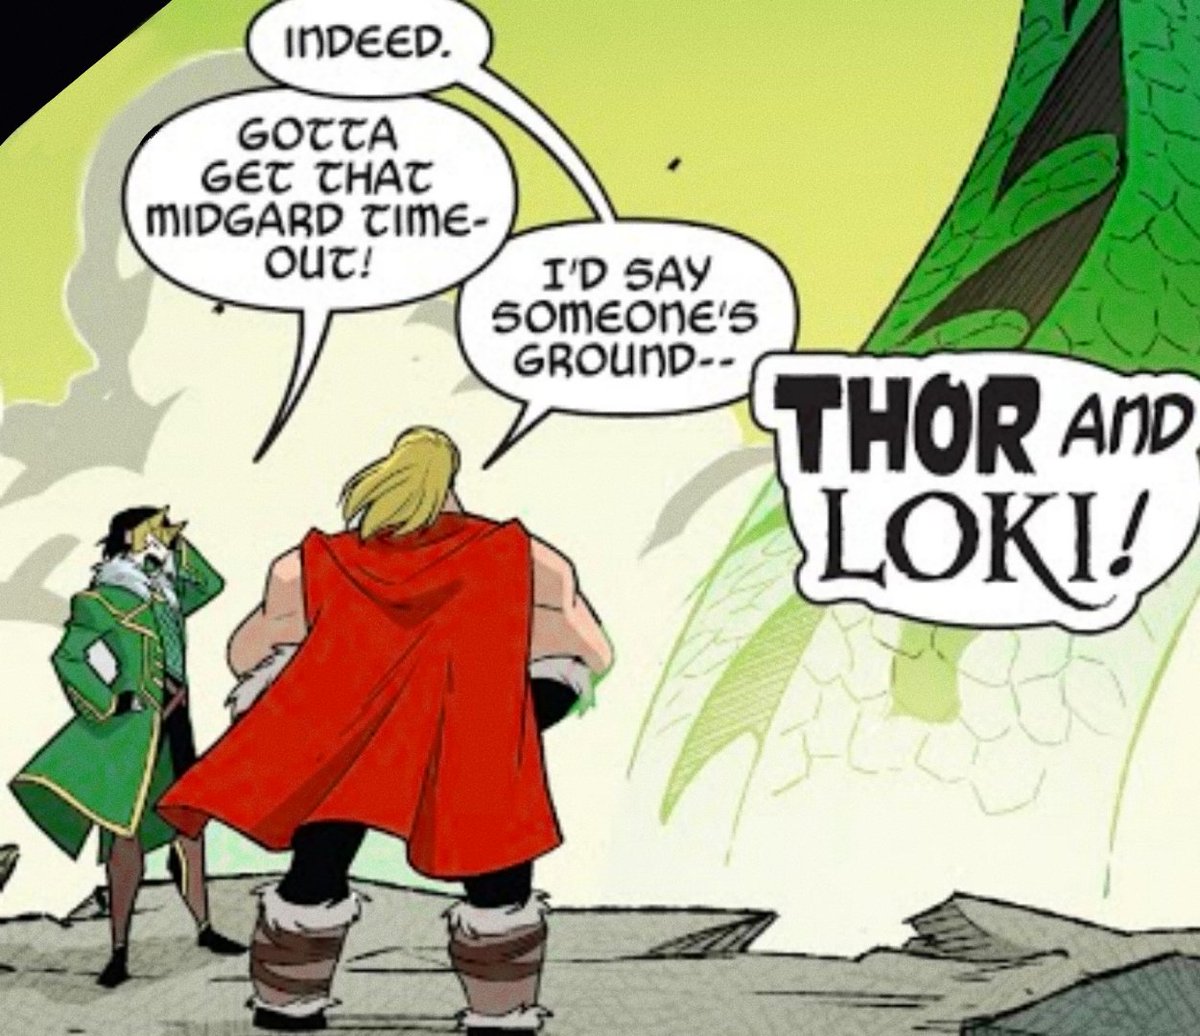 RT @thorNlokiatm: Right now Thor and Loki are getting scolded by their parents for being reckless. https://t.co/AiXA2Fn7RK